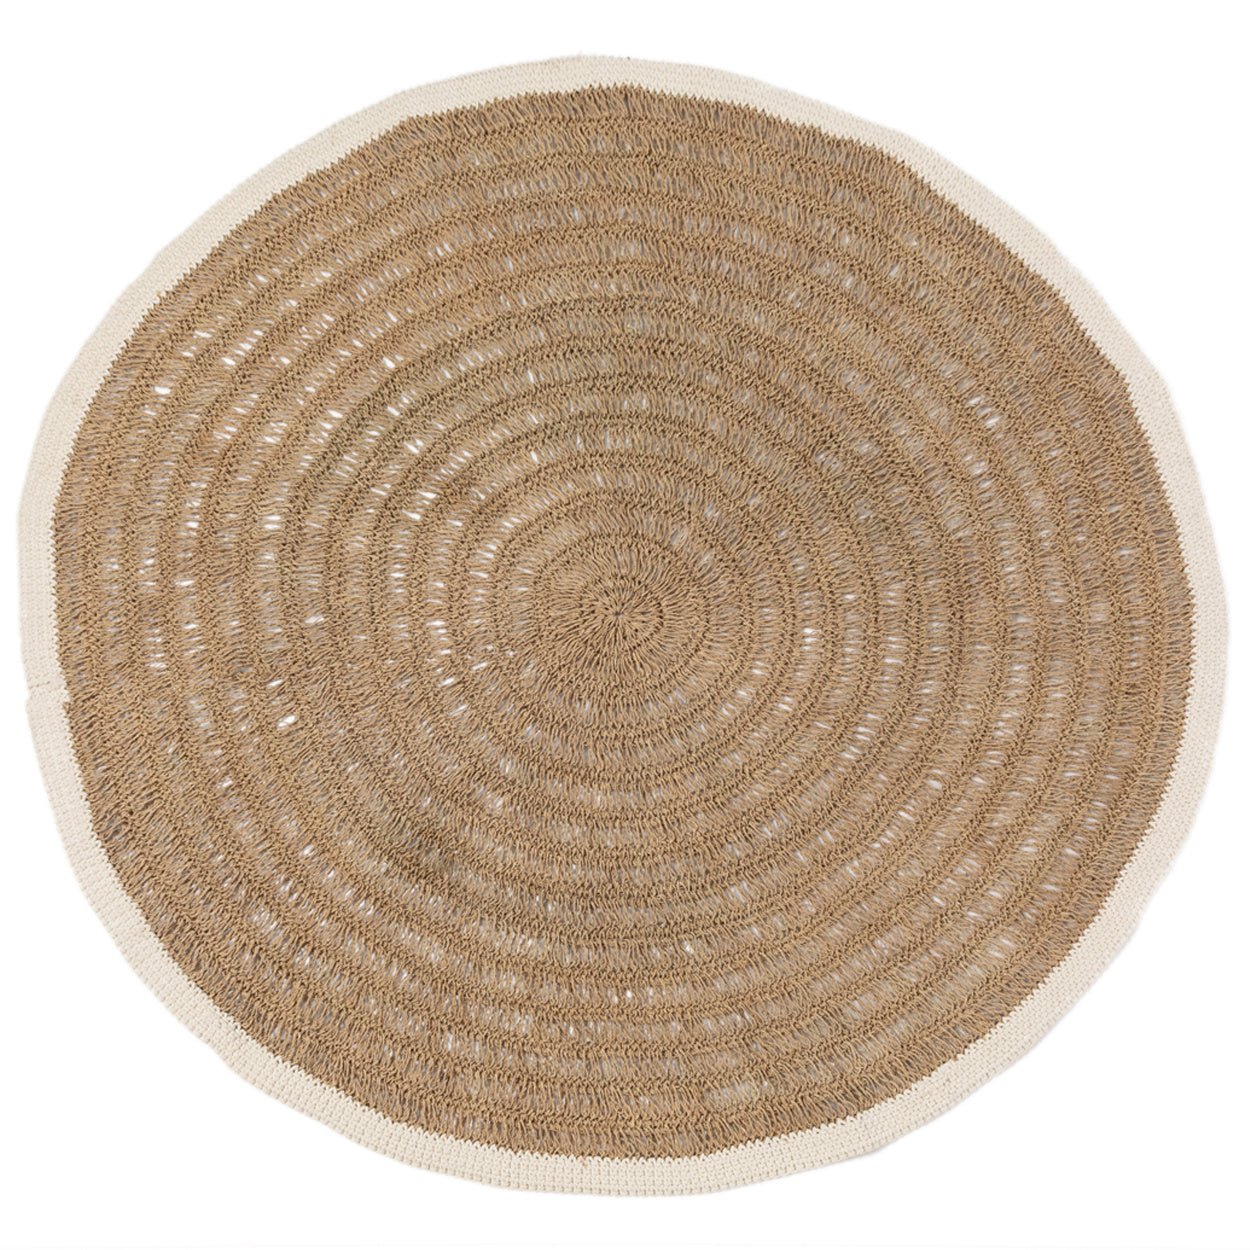 The round seagrass and cotton carpet - Natural white - 200